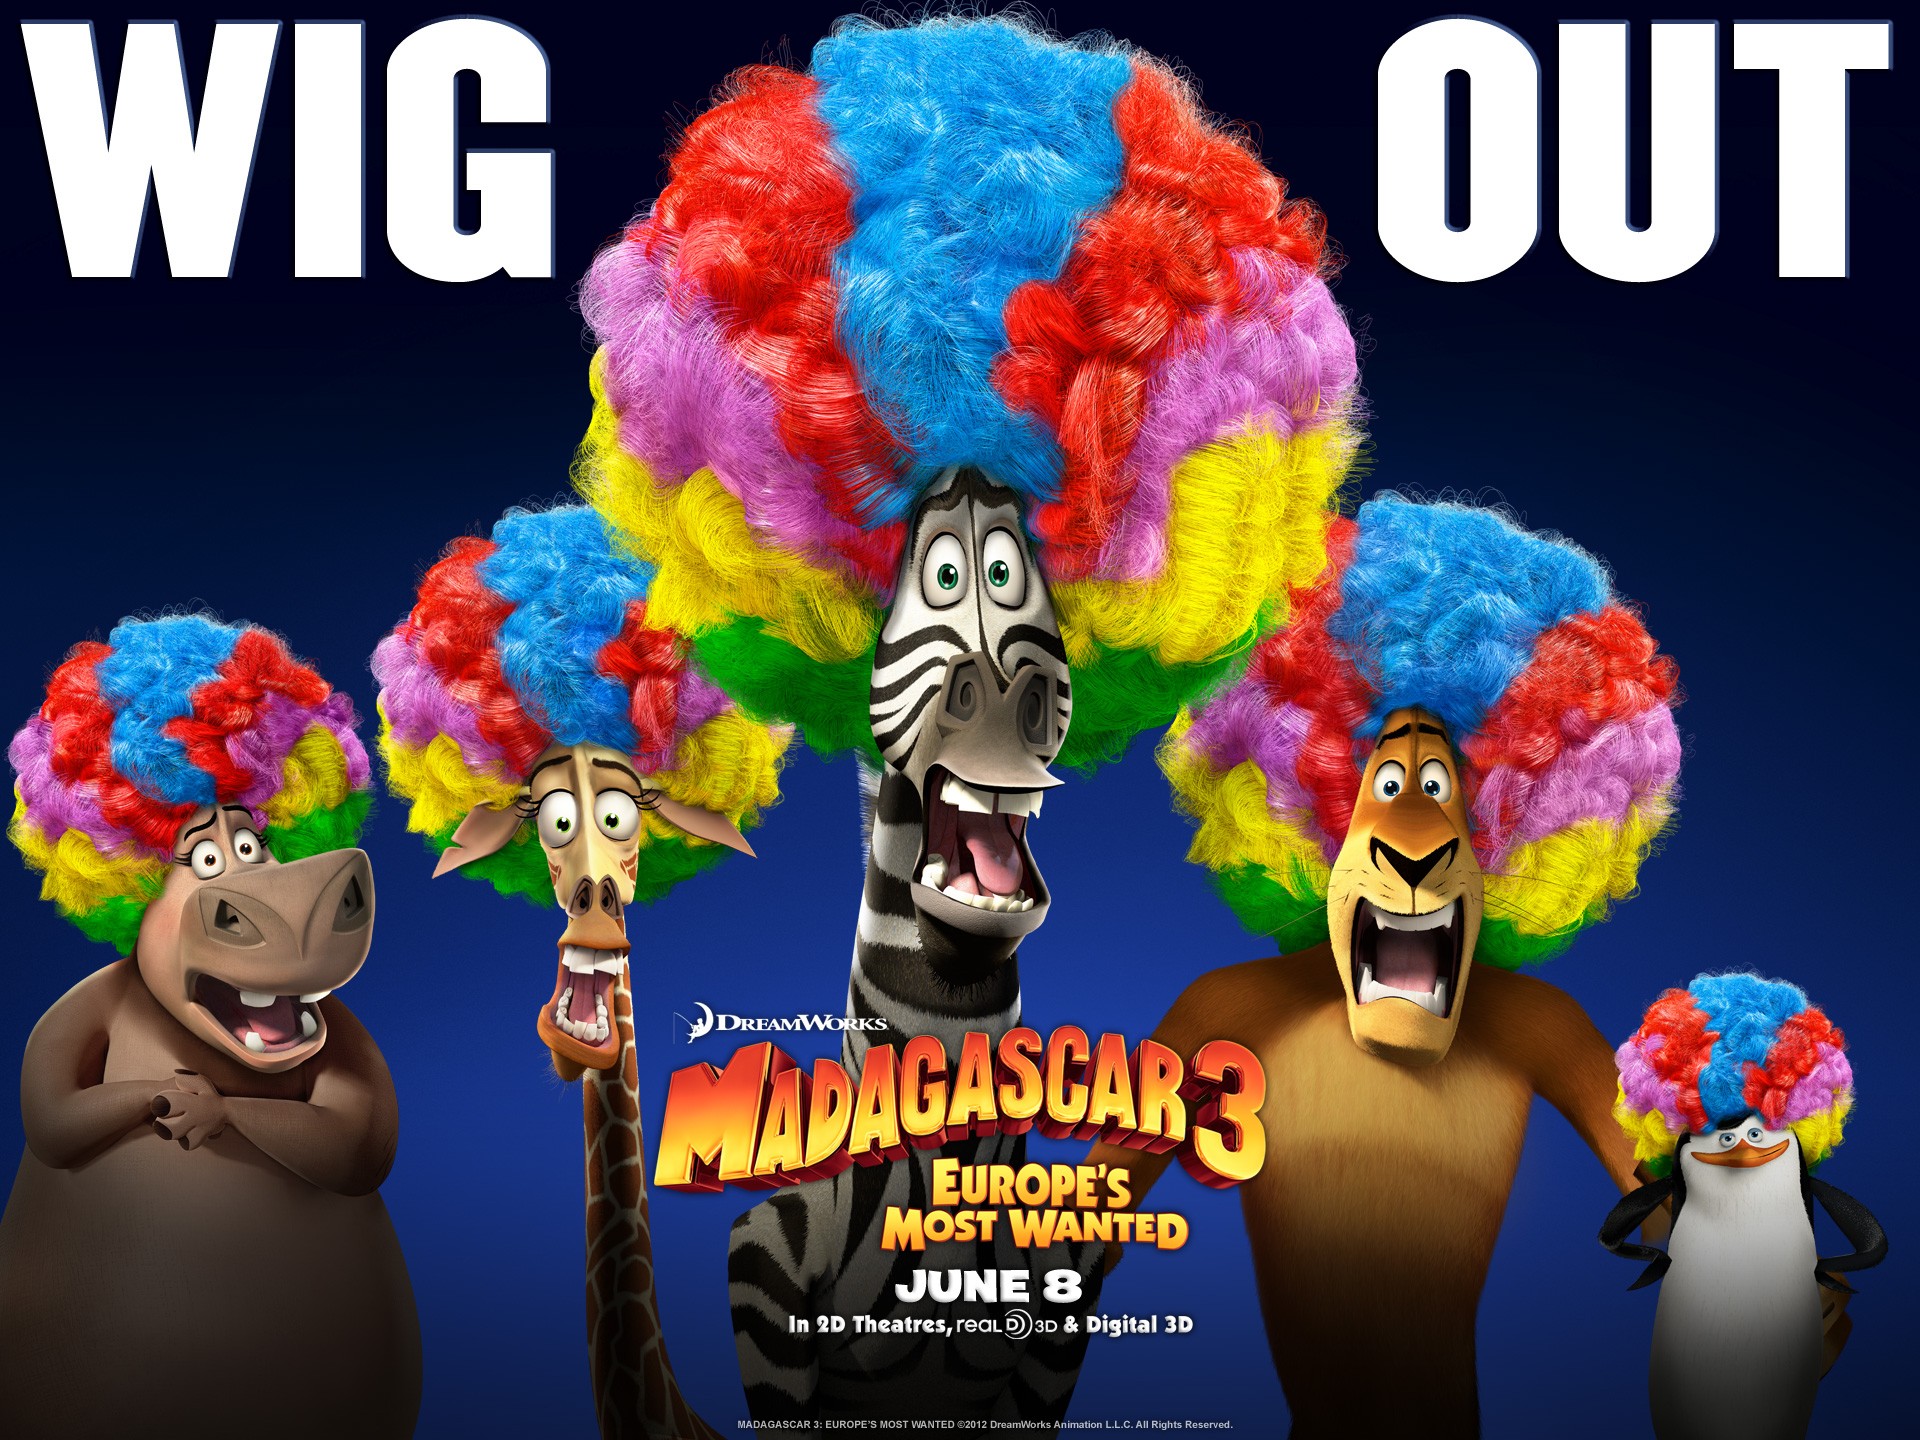 Afrogroup Madagascar 3 Europes Most Wanted Movies Wallpaper - Madagascar 3  Europe's Most Wanted Scream - 1920x1440 Wallpaper 